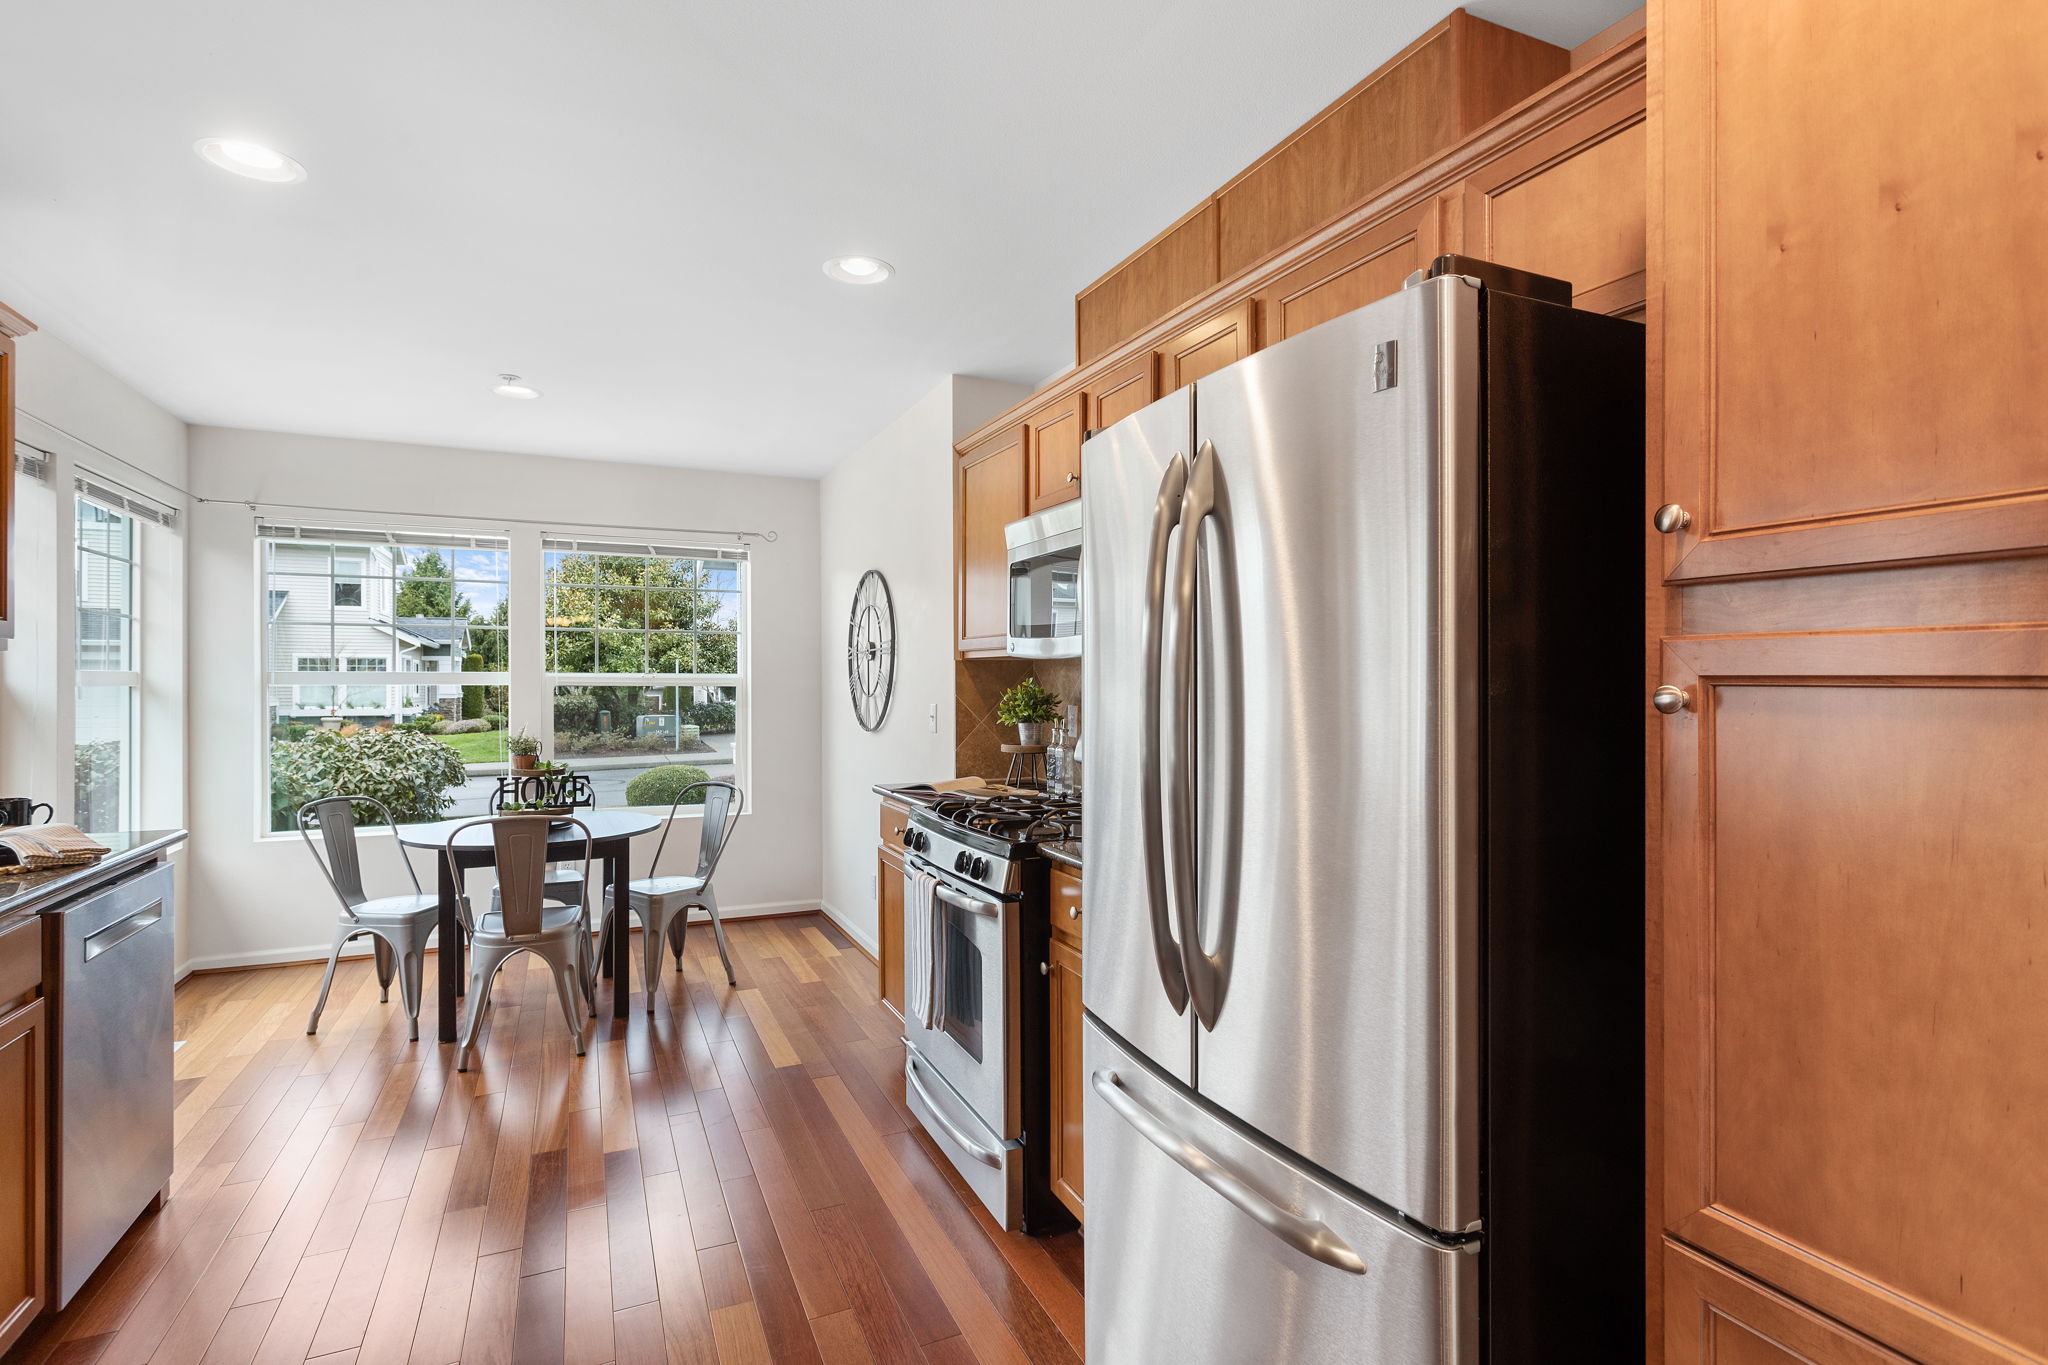 Stainless Steel appliances and built in pantry in the kitchen